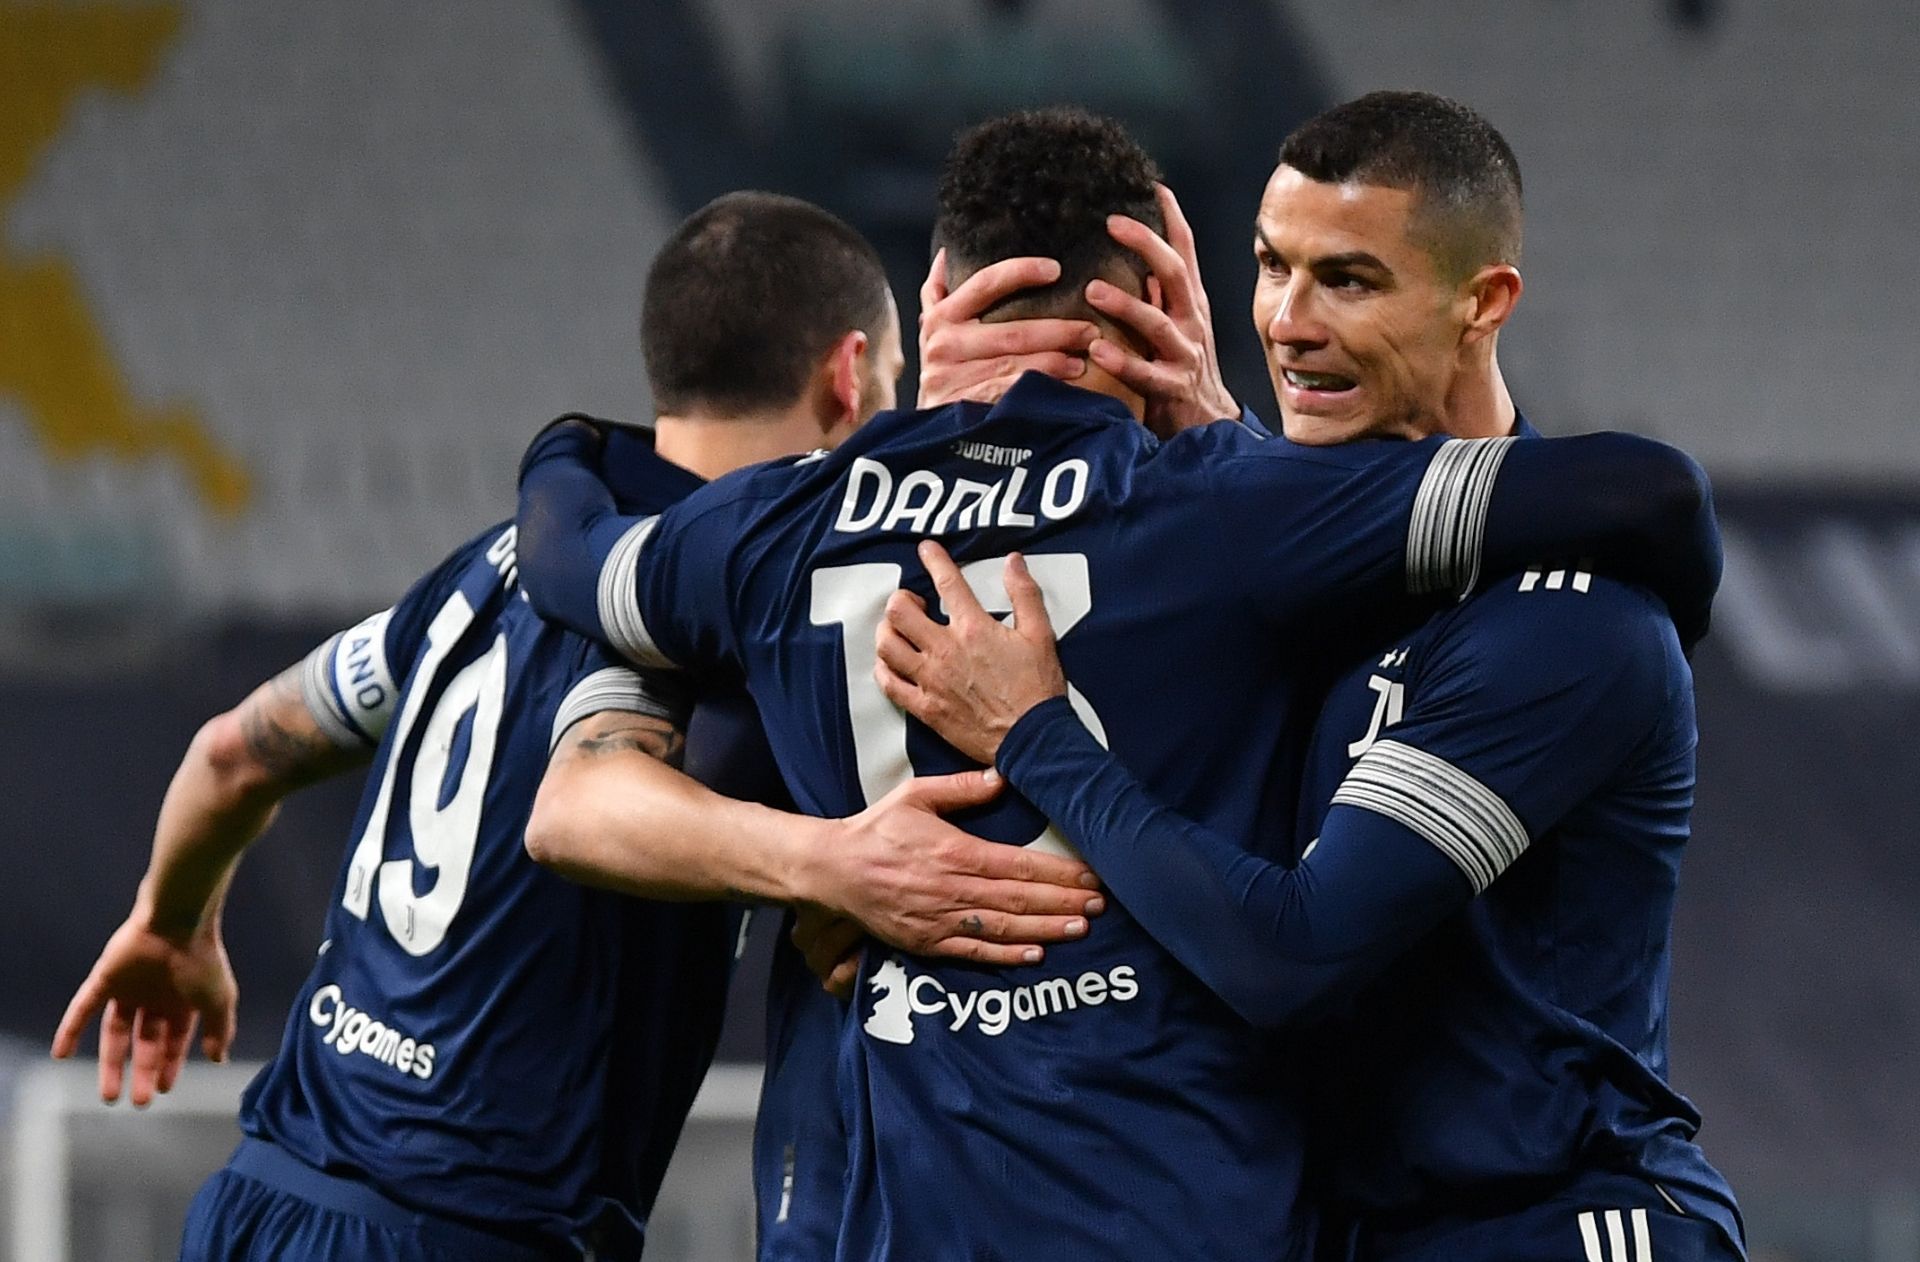 Juventus Vs - Serie A Preview All You Wanted To Know About Juventus Vs Torino - Juventus was drawn against porto in the ucl last 16, while atalanta will take on real madrid when continental play resumes in february.